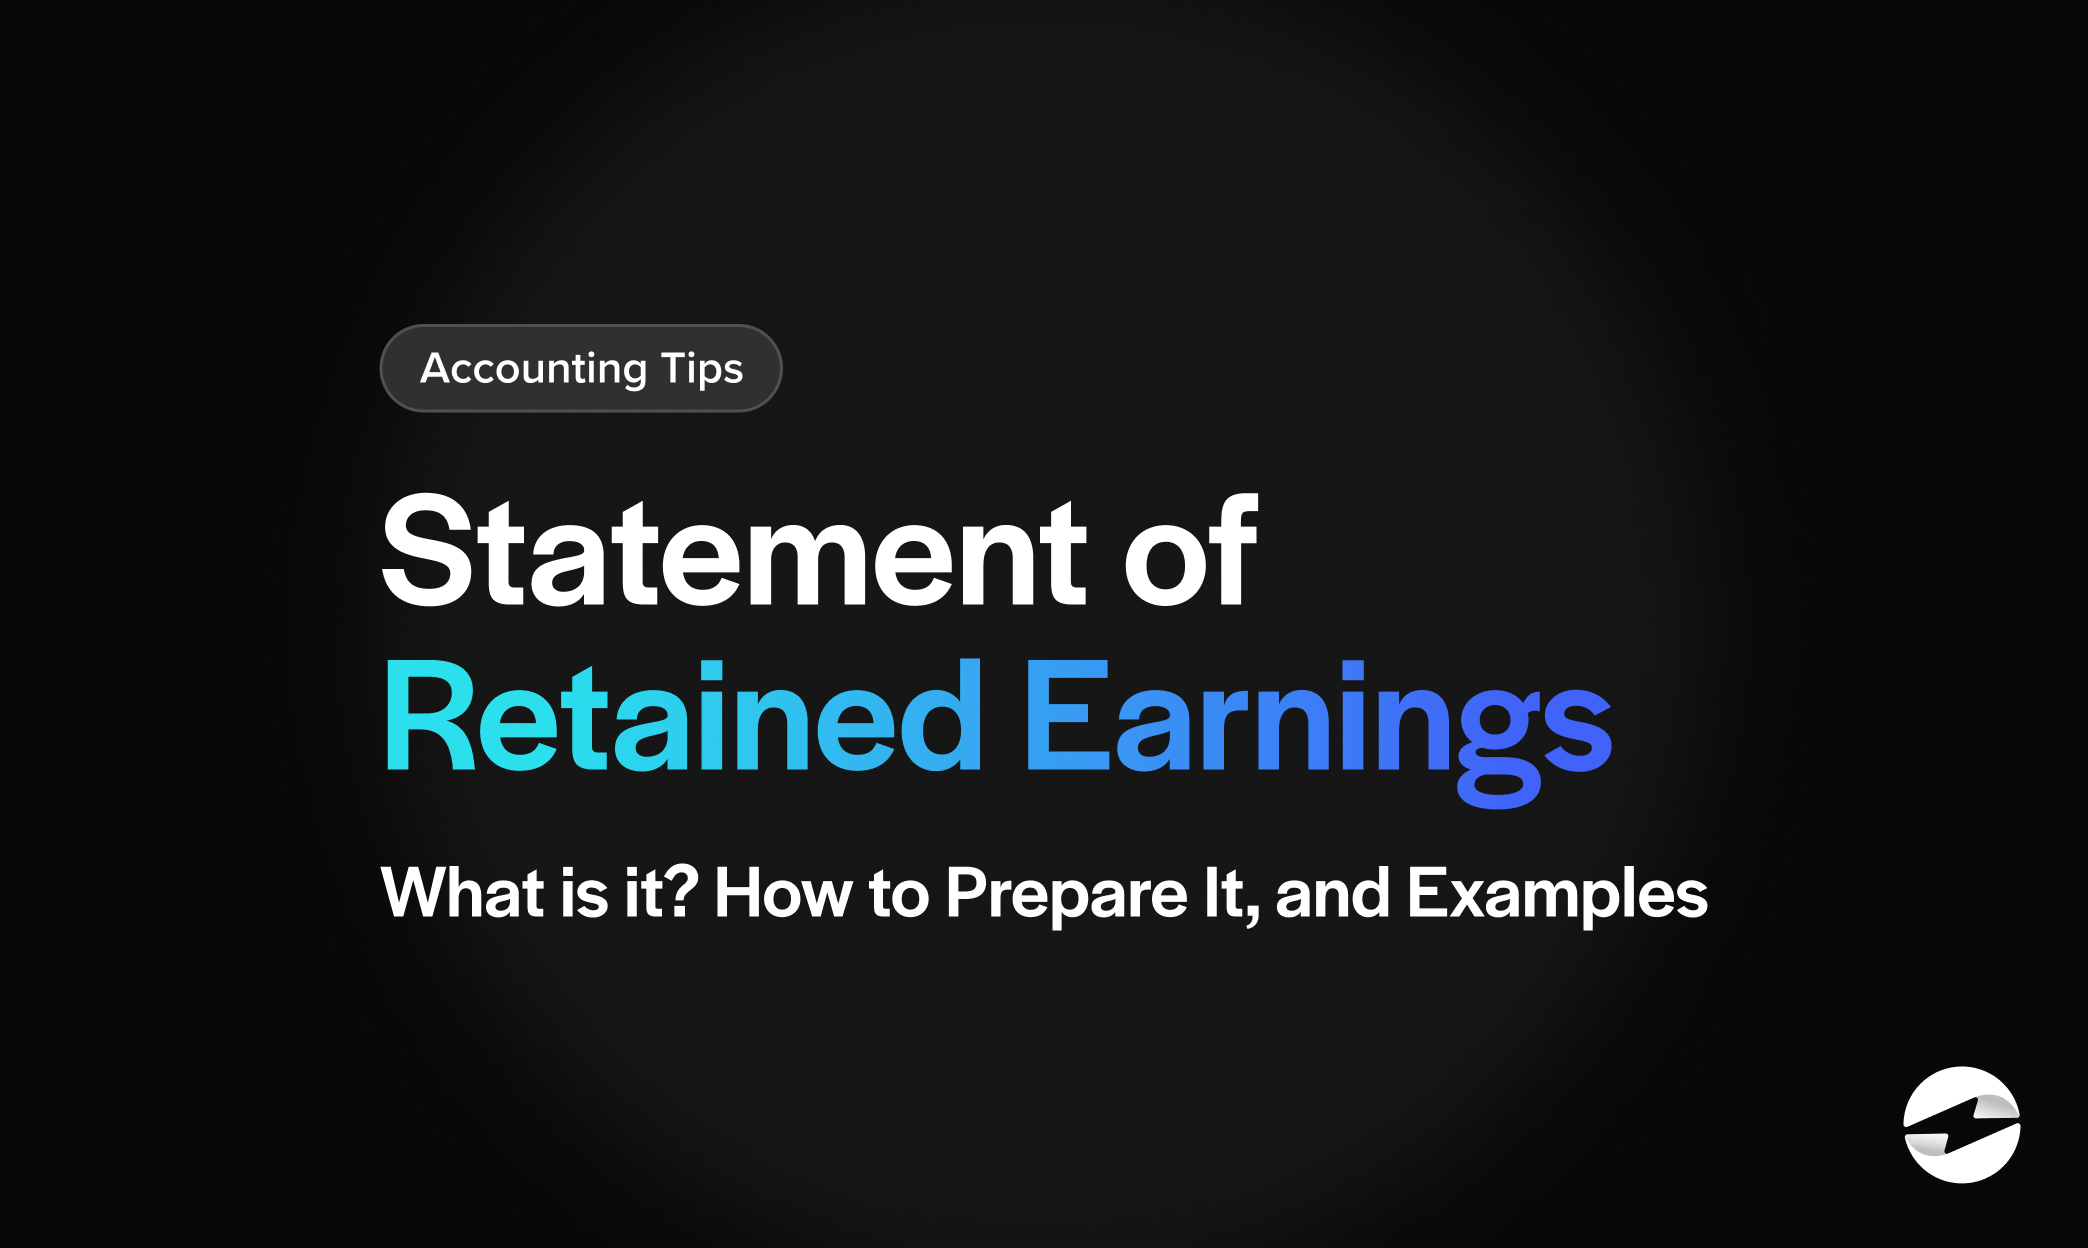 Statement of Retained Earnings: What is it? How to Prepare It And Examples